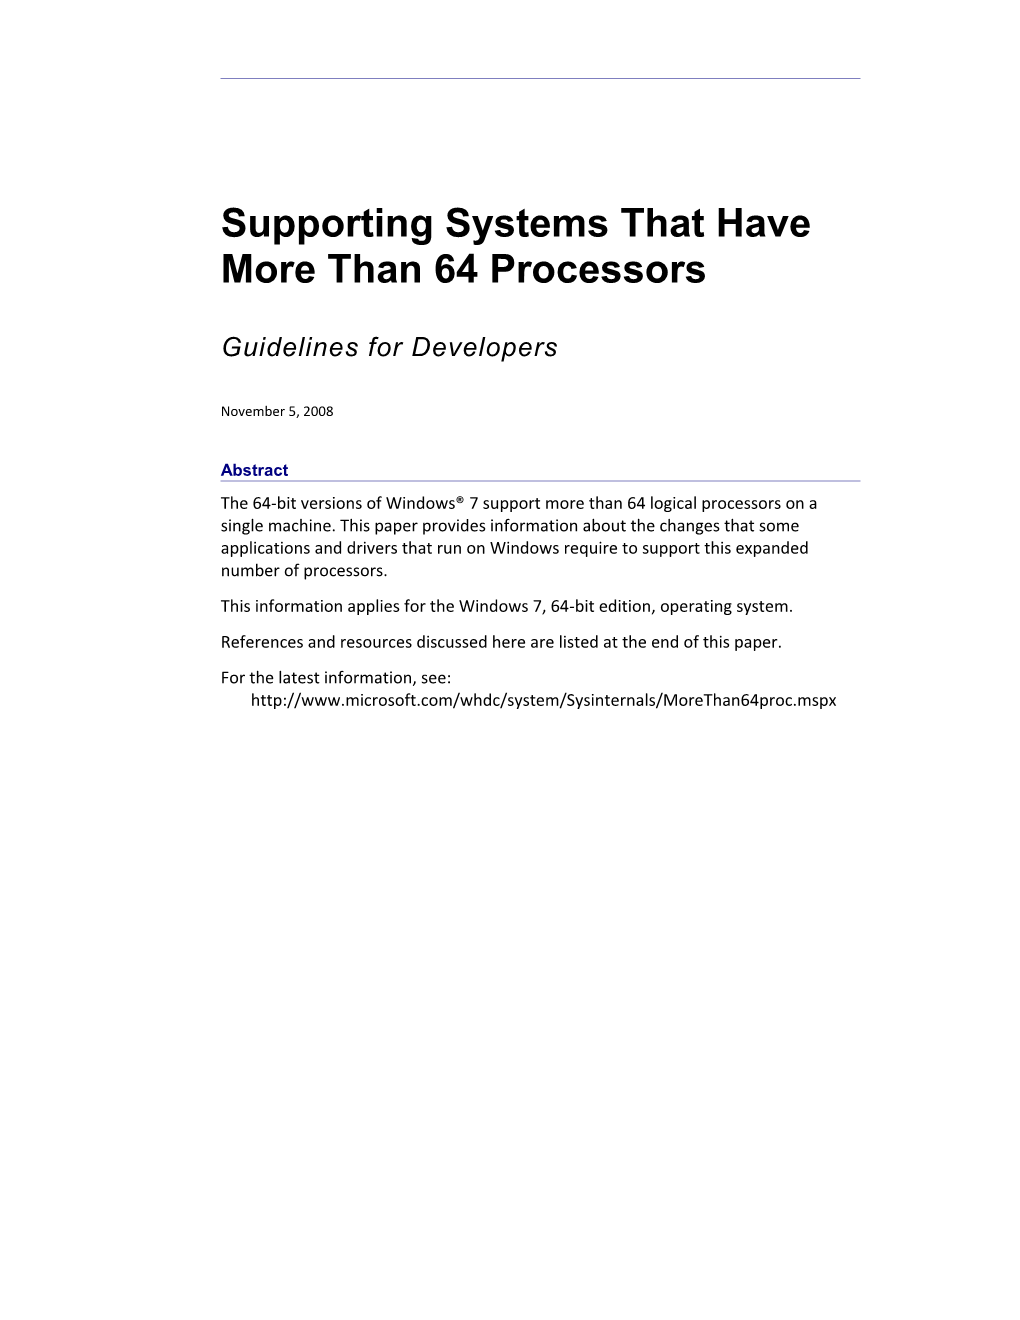 Supporting Systems That Have More Than 64 Processors - 2